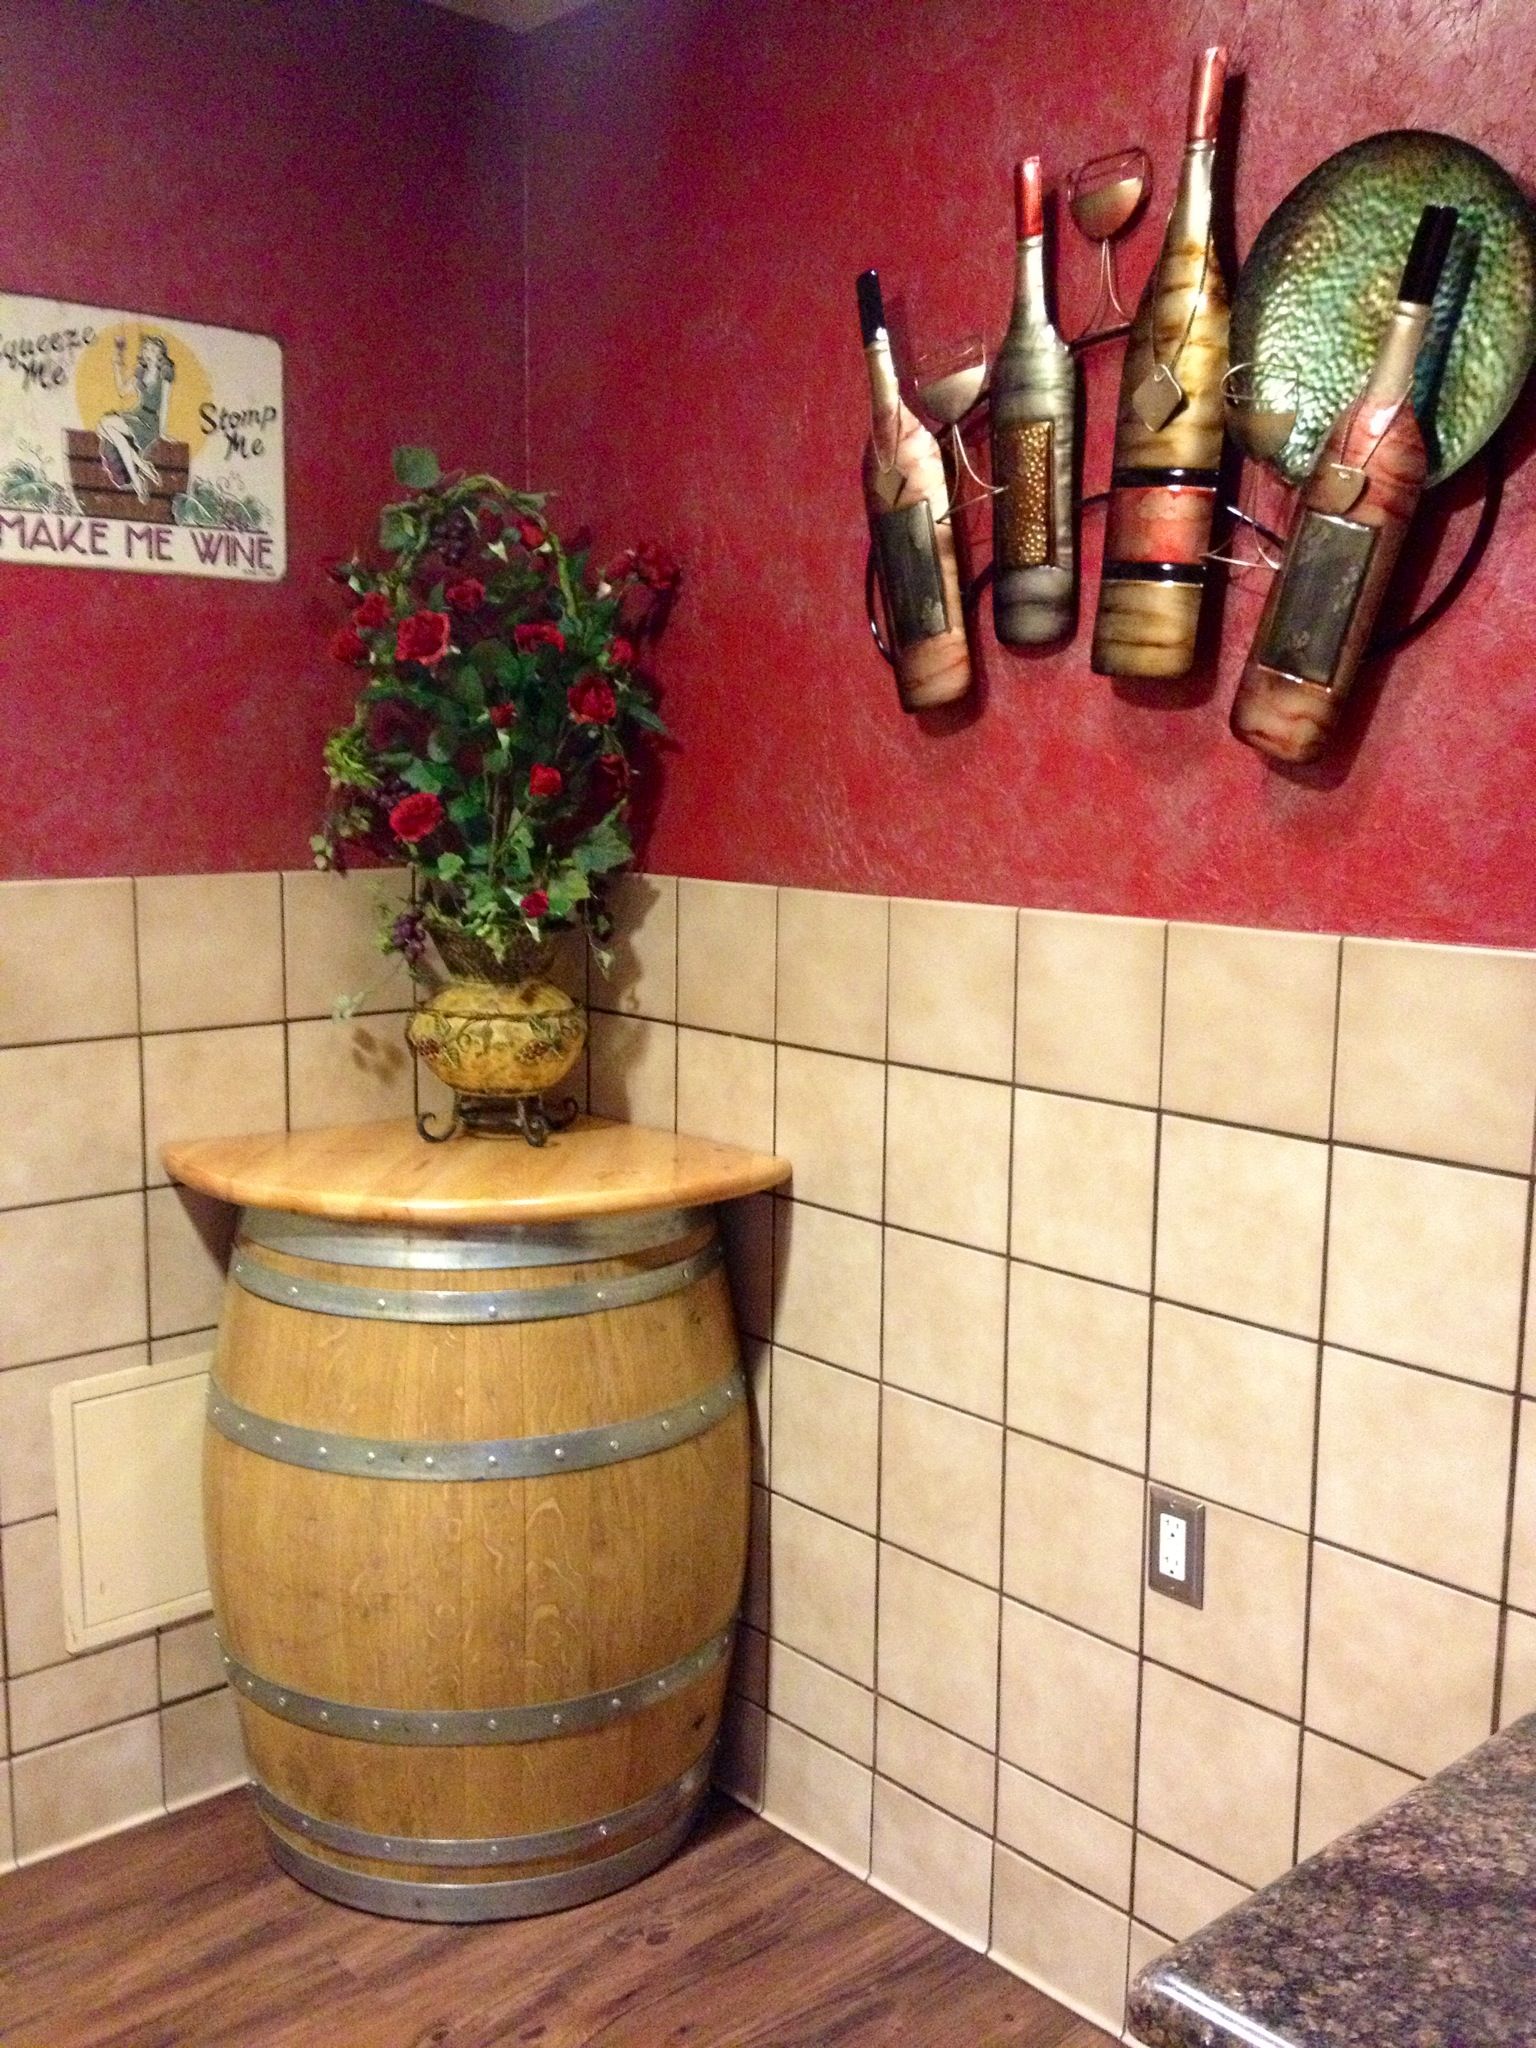 A peek into the women's restroom decorated with an old wine barrel and wine related decor